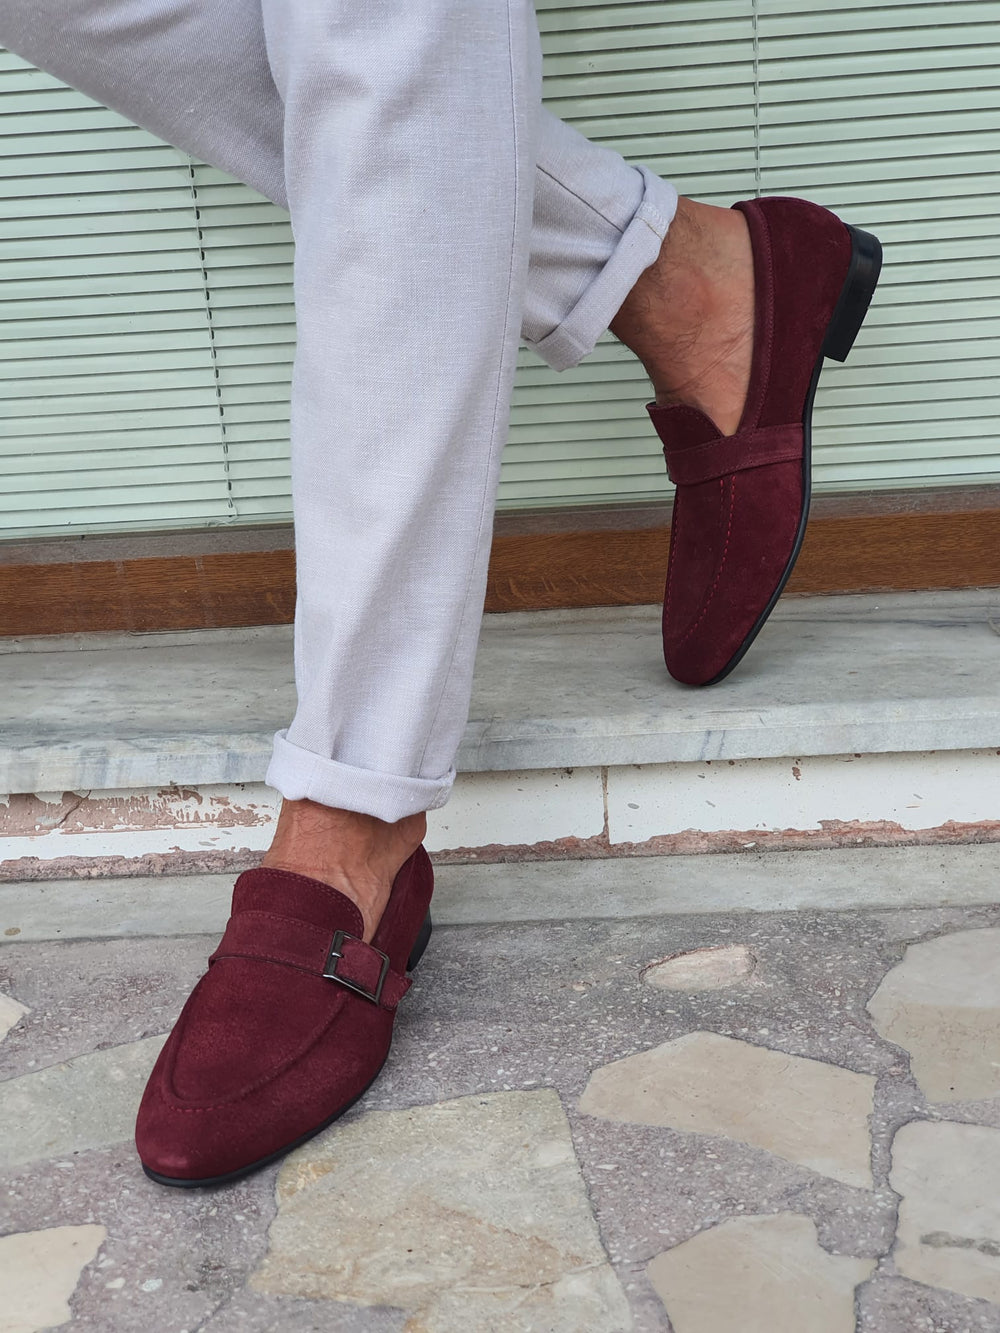 Chase MenStyleWith Neolite Claret Red Suede Leather Shoes - MENSTYLEWITH